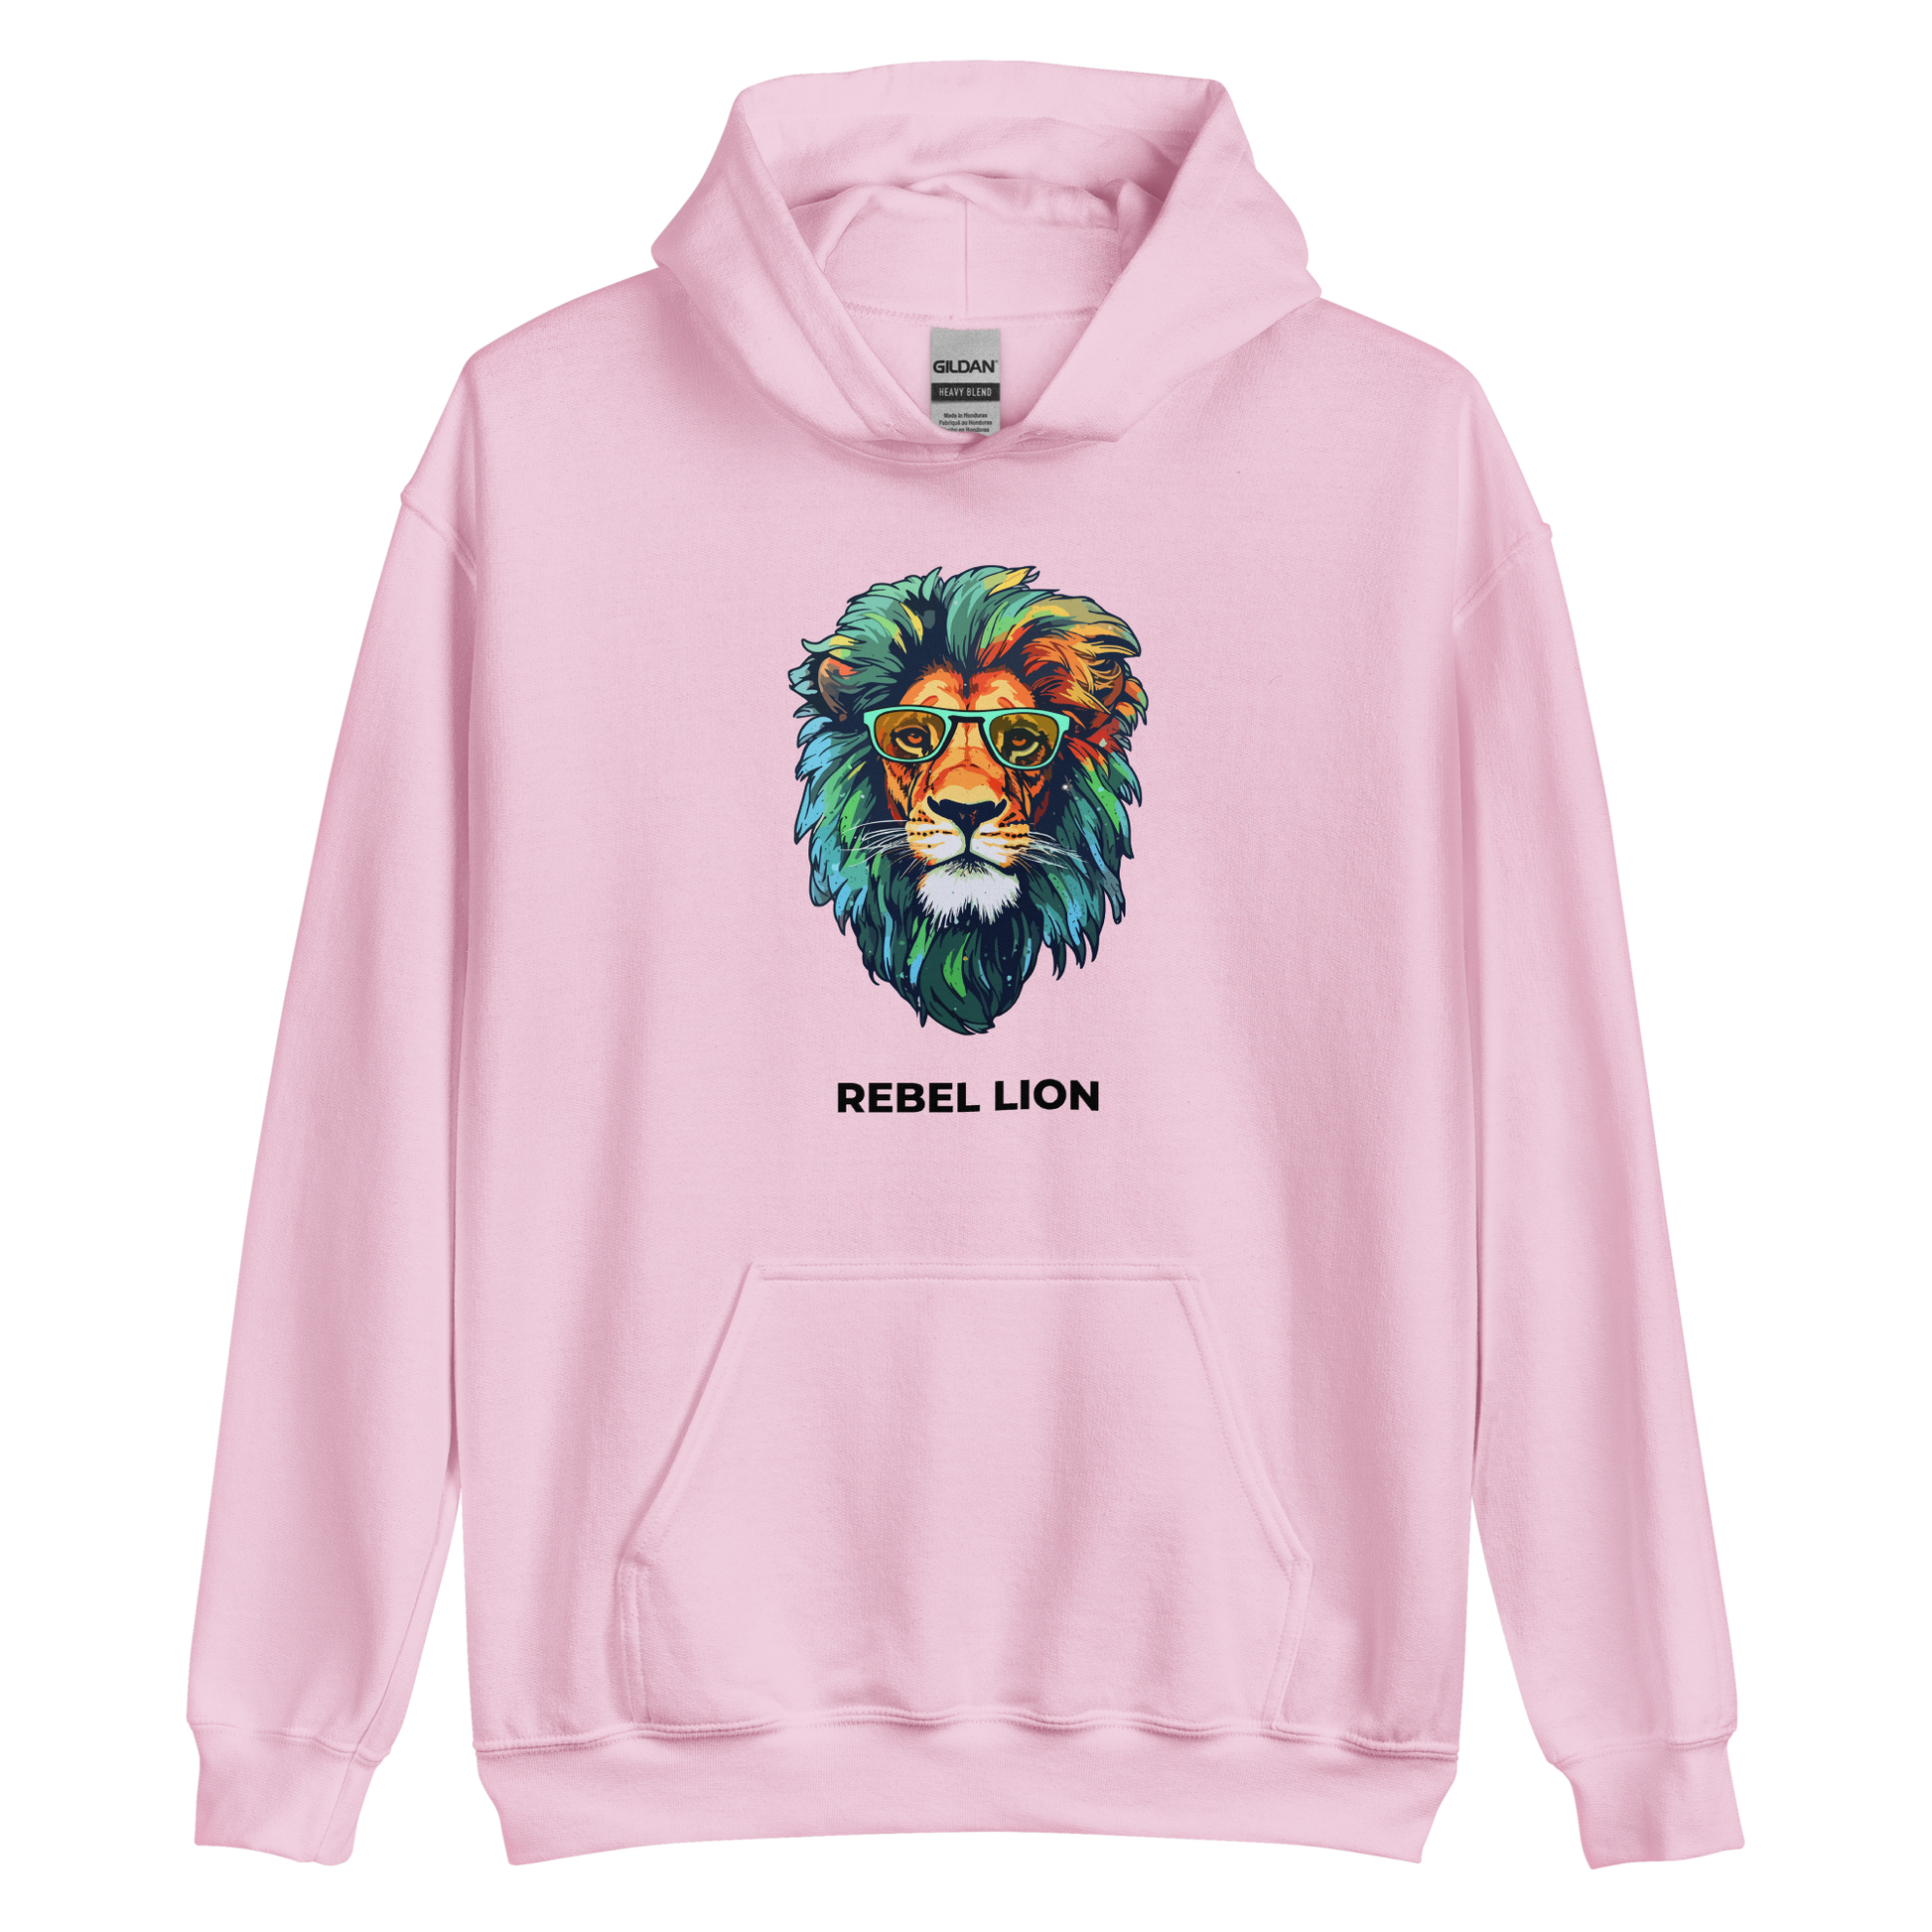 Light Pink Lion Hoodie featuring a fierce Rebel Lion graphic on the chest - Funny Graphic Lion Hoodies - Boozy Fox